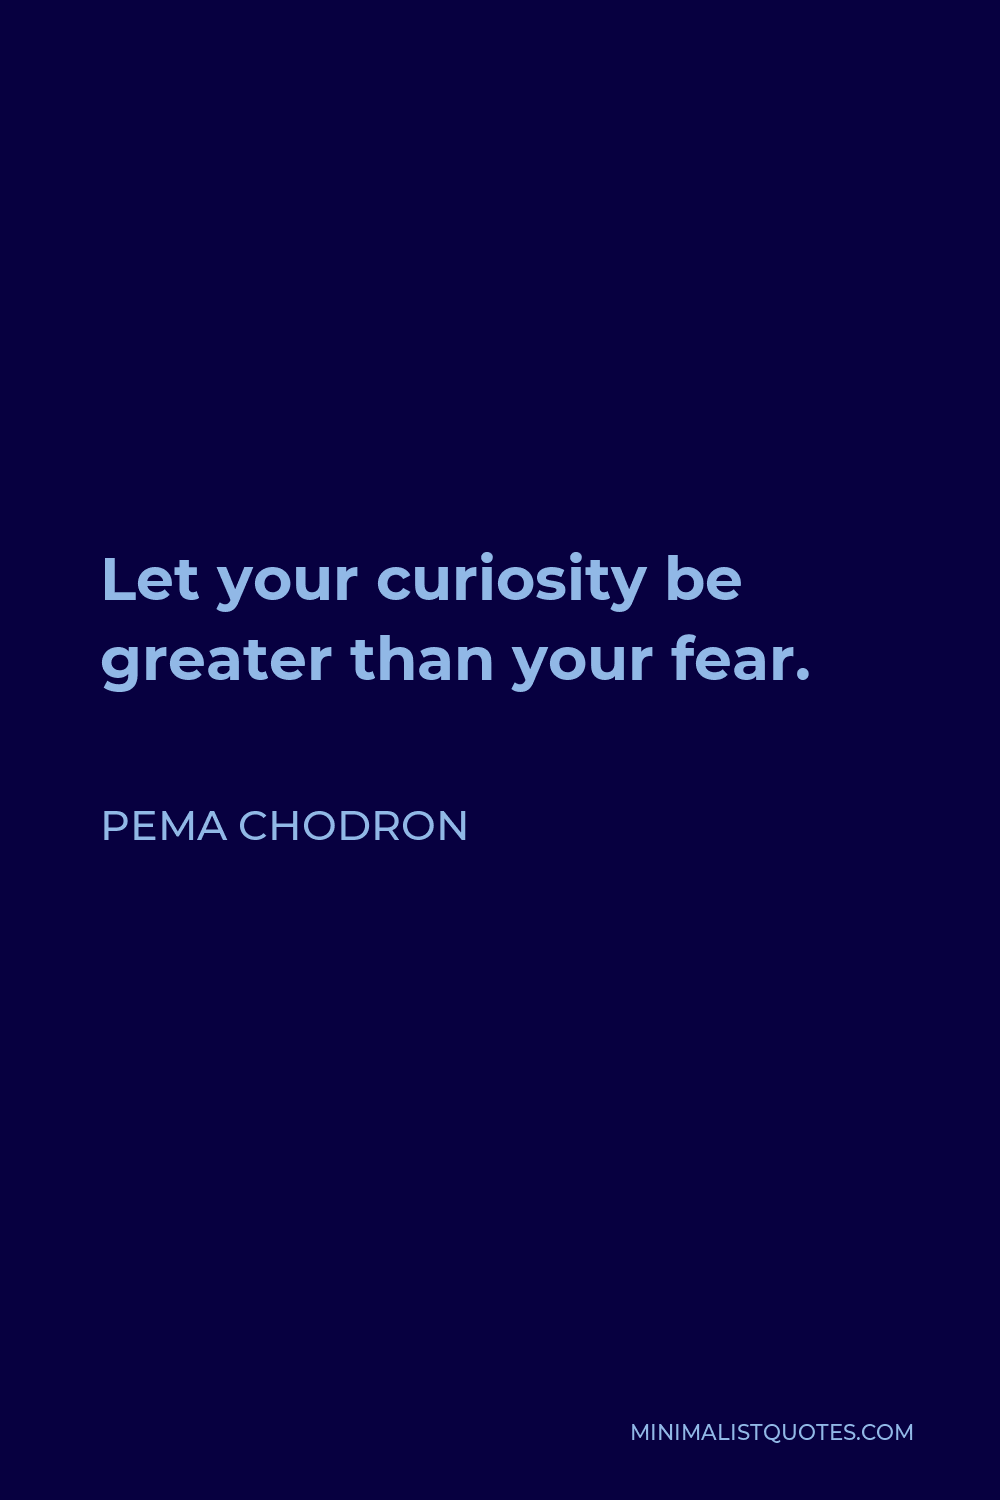 Pema Chodron Quote - Let your curiosity be greater than your fear.